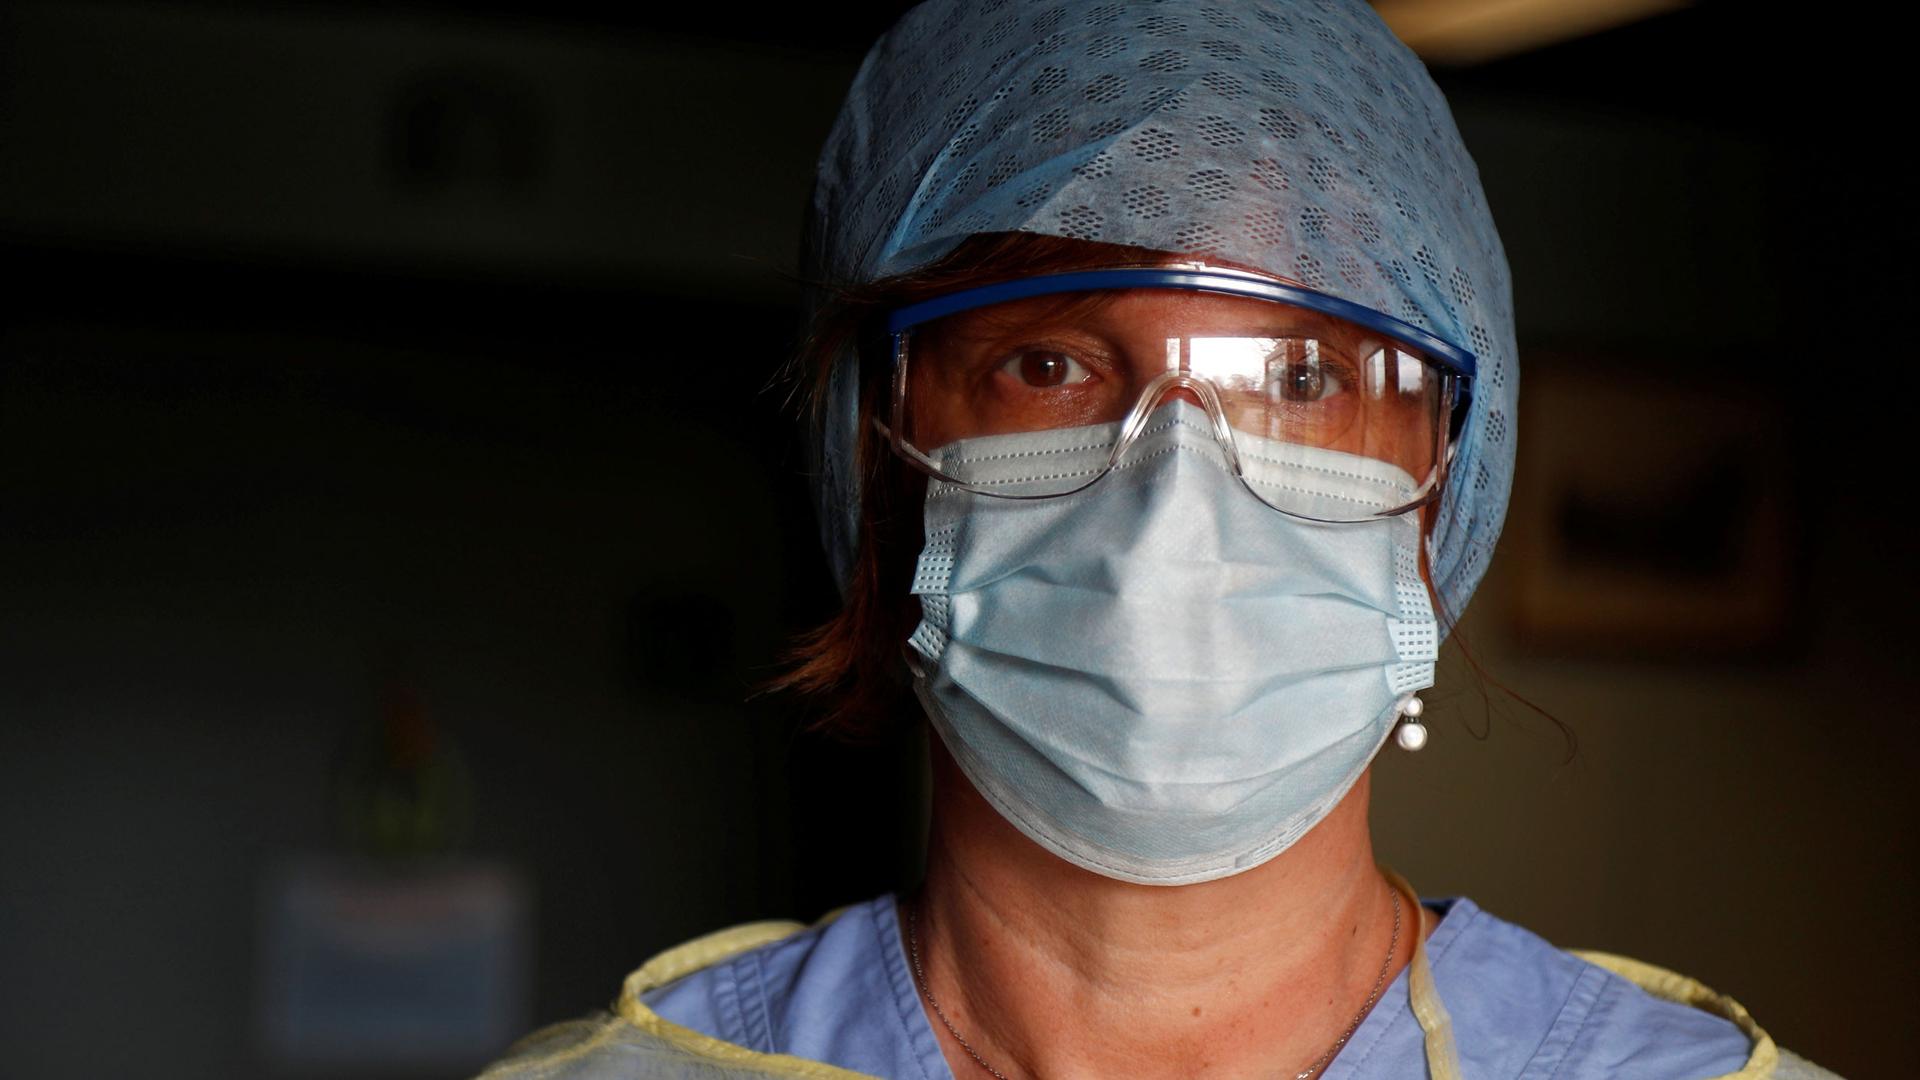 A close-up photograph of a doctor a wearing protective face mask and goggles.